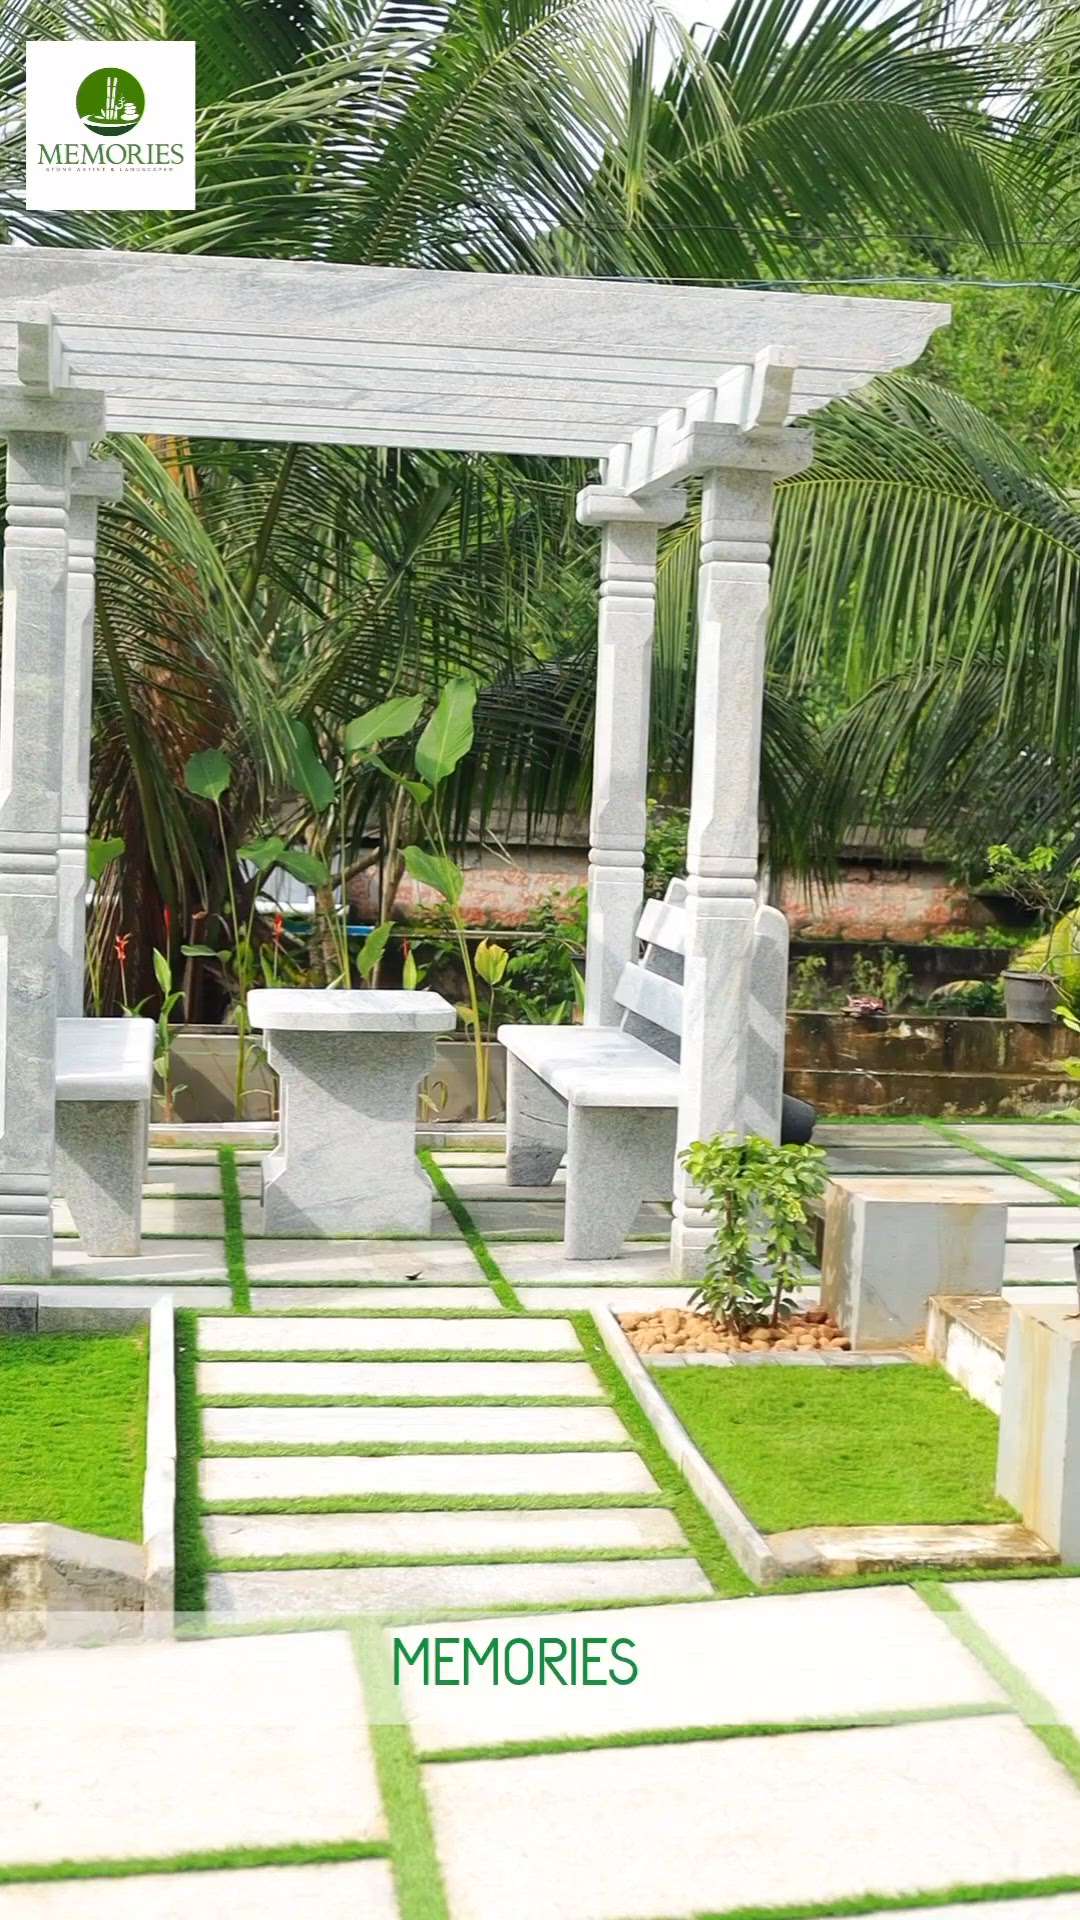 Creating outdoor masterpieces with precision and passion. Stay tuned for the reveal of our latest landscaping project! 🏞️✨ #
.
.
.
Location :📍Memory Stones | Kerala 
Email : memorystones1@gmail.com

📞Call us : +91 9447588481
-
-
-
#Memories #Landscaping #MemoryStone #MemoryStones #Landscaping #BestPrice #OutdoorDesign #GardenTransformation #KollamLandscaping #Landscaping #GardenDesign #mallugram #KollamLandscaping ##LandscapingInProgress
#NatureCrafted #LandscapeDesign #WorkInProgress #OutdoorTransformation #GardenArtistry #GreenSpaces